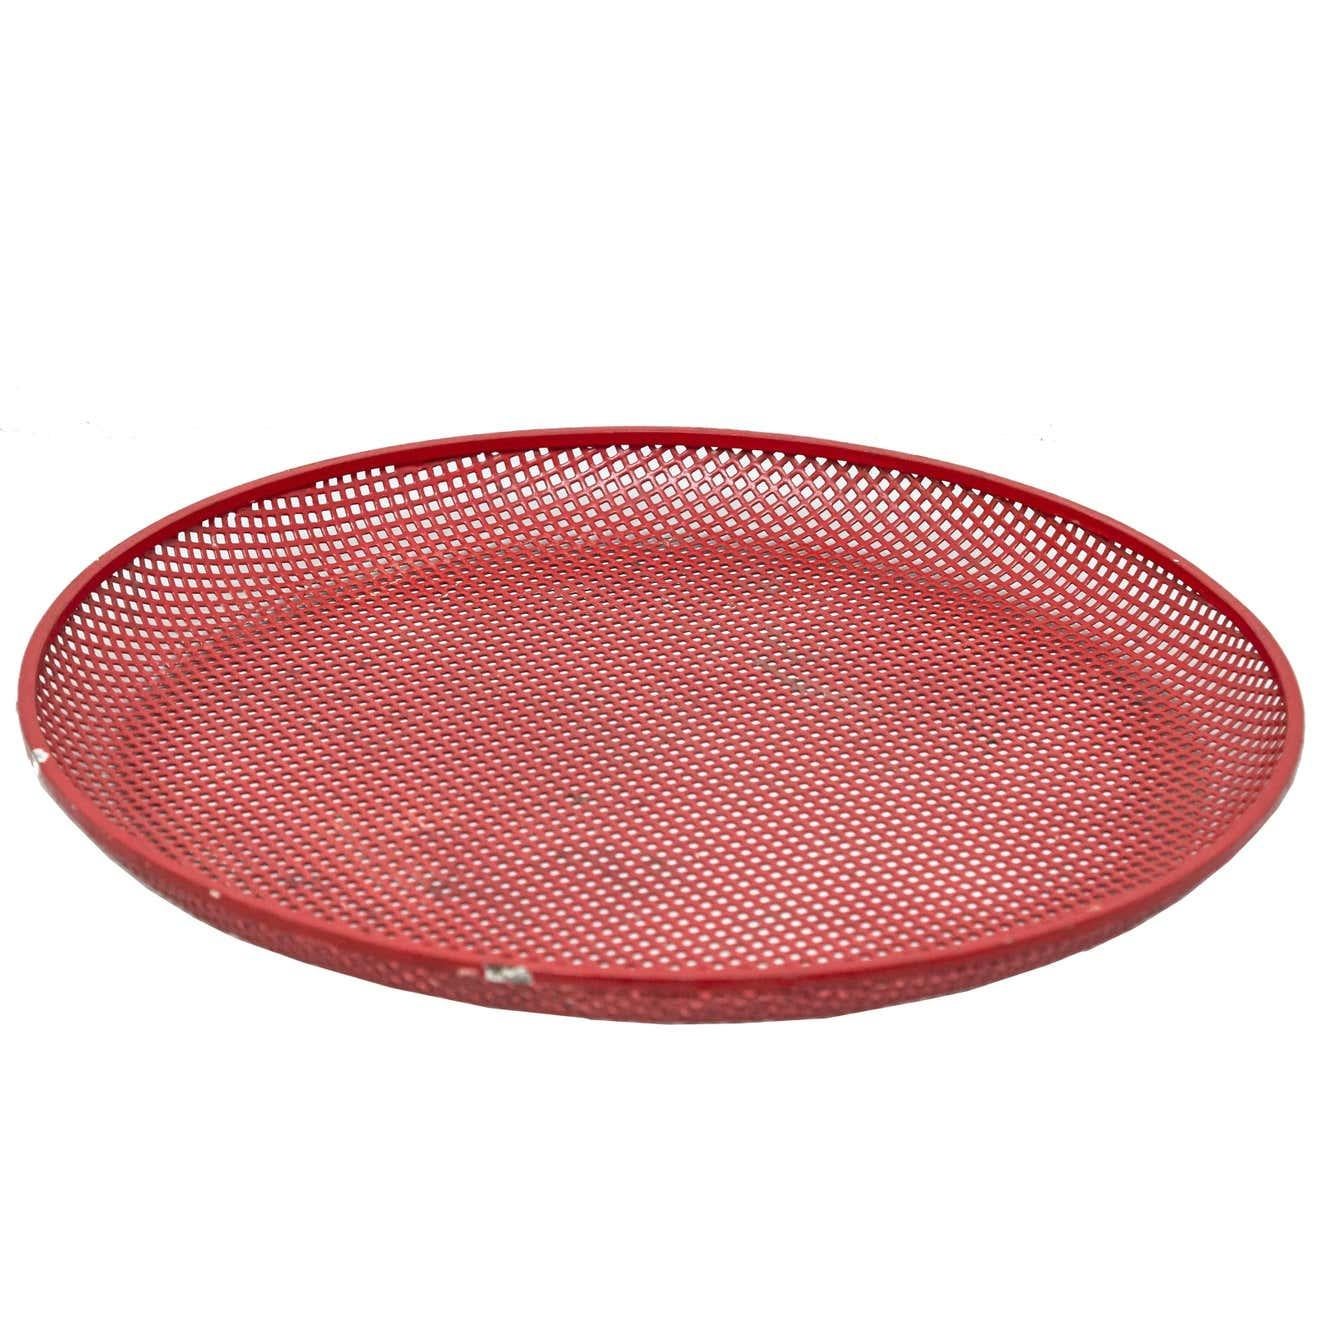 Enameled metal plate designed by Mathieu Matégot.
Manufactured by Artimeta (Holland), circa 1950.
Lacquered perforated metal, seem to be repainted many years ago.

In good original condition, with minor wear consistent with age and use, preserving a